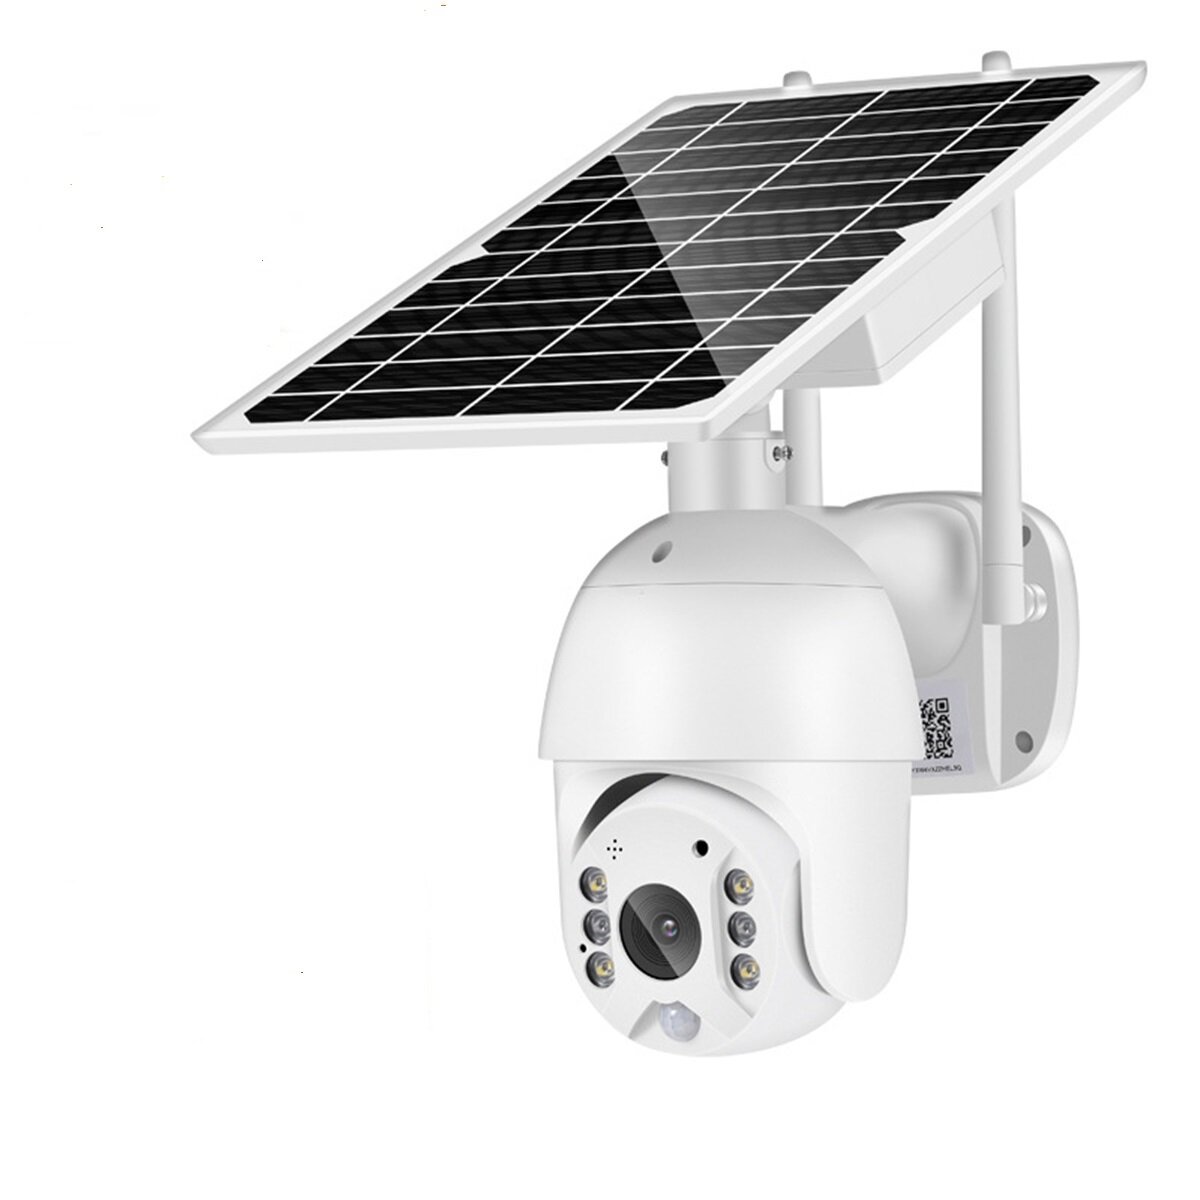 BESDER 4G/WiFi Solar Powered Network Surveillance Camera PTZ Two Way Audio Outdoor Waterproof Low Power Solar Dome Camer  - buy with discount